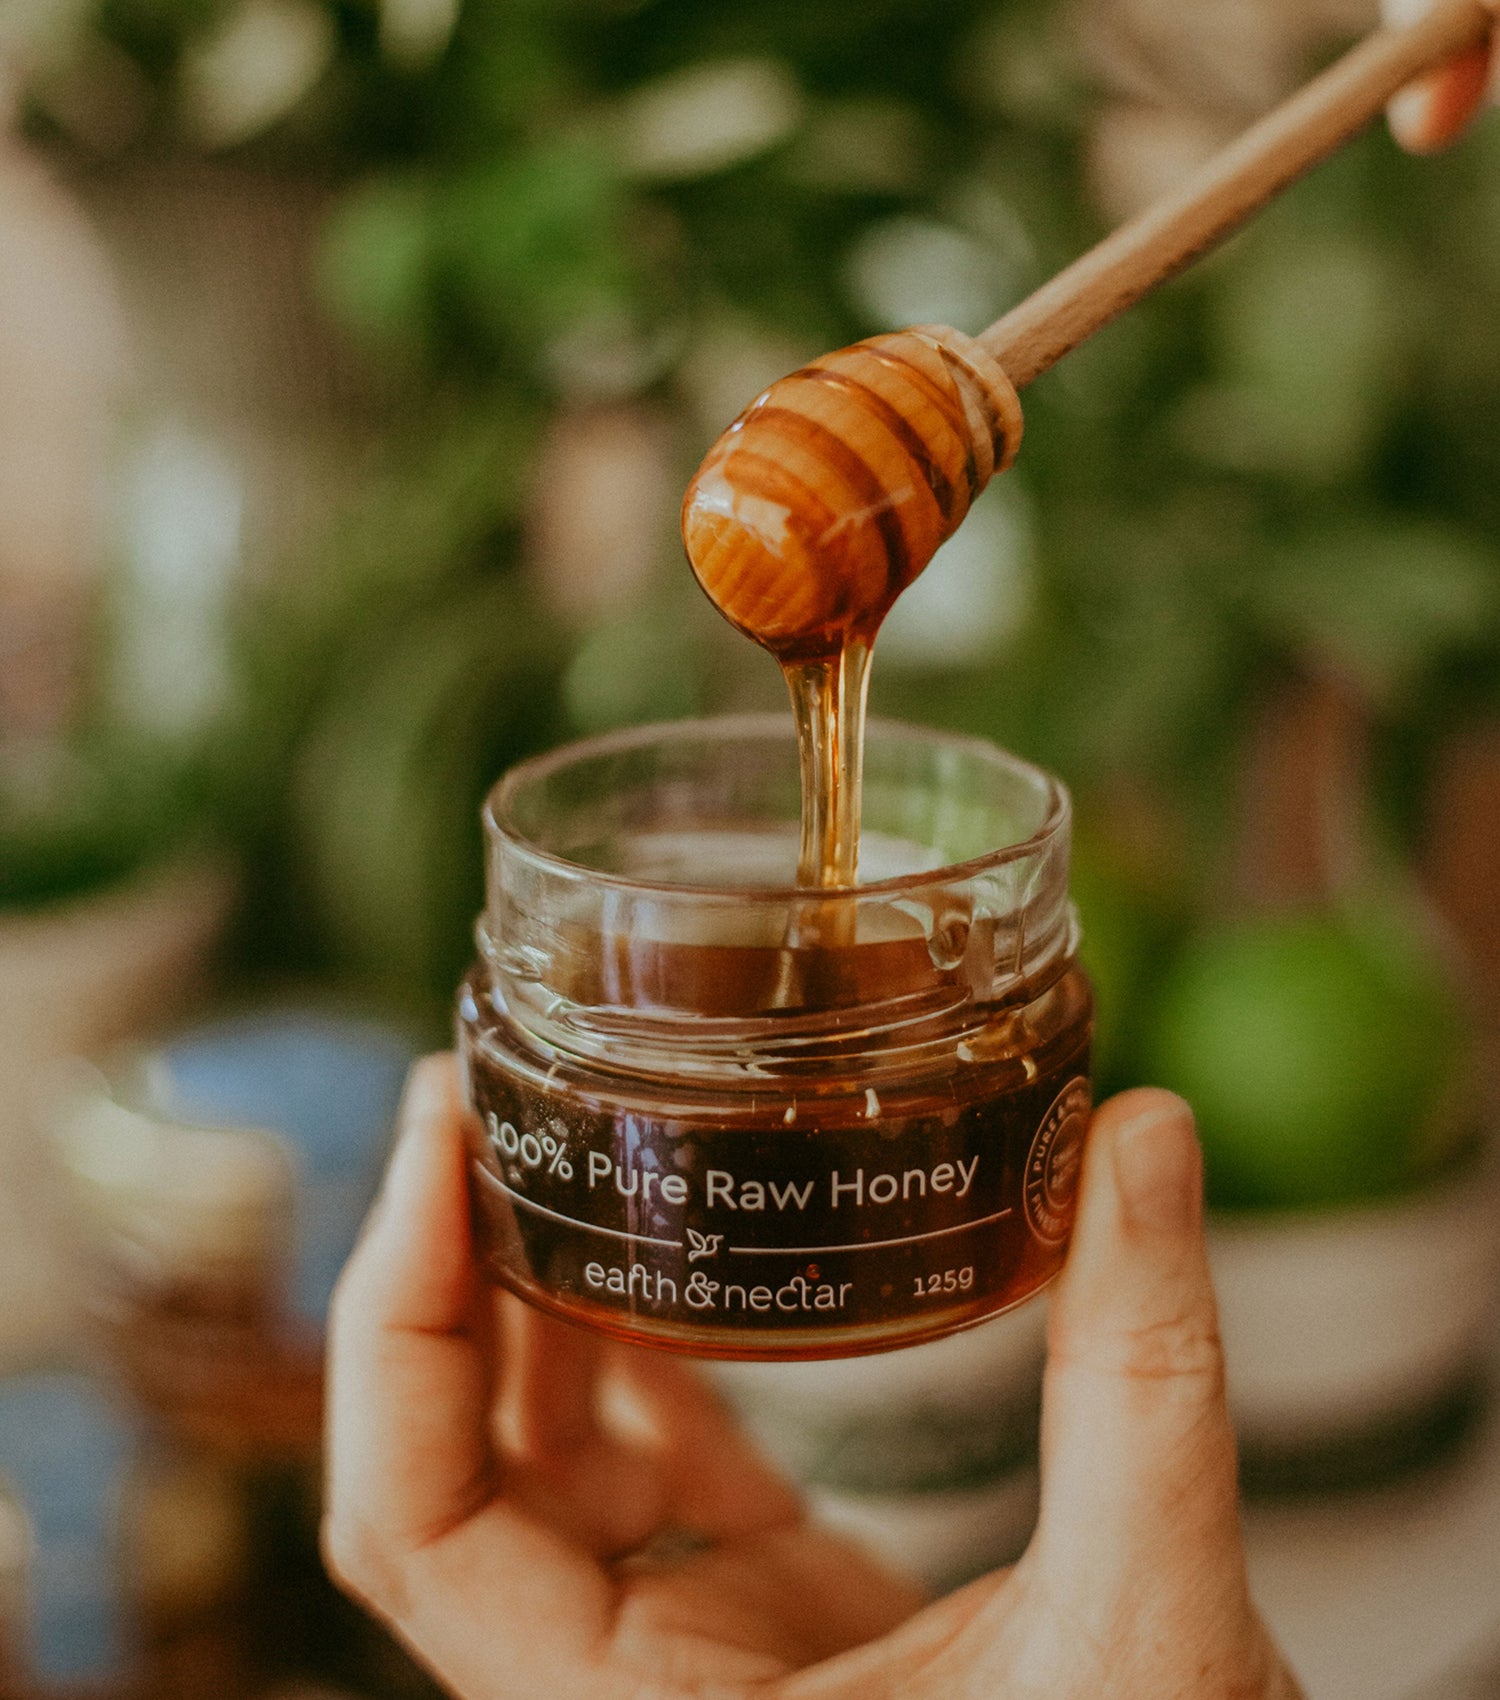 Holding a jar of Earth and Nectar 100% pure, raw honey direct from the Earth and Nectar farm in Roleystone, Perth Western Australia. A honey dipper is being used to show the honey drizzling back into the jar.